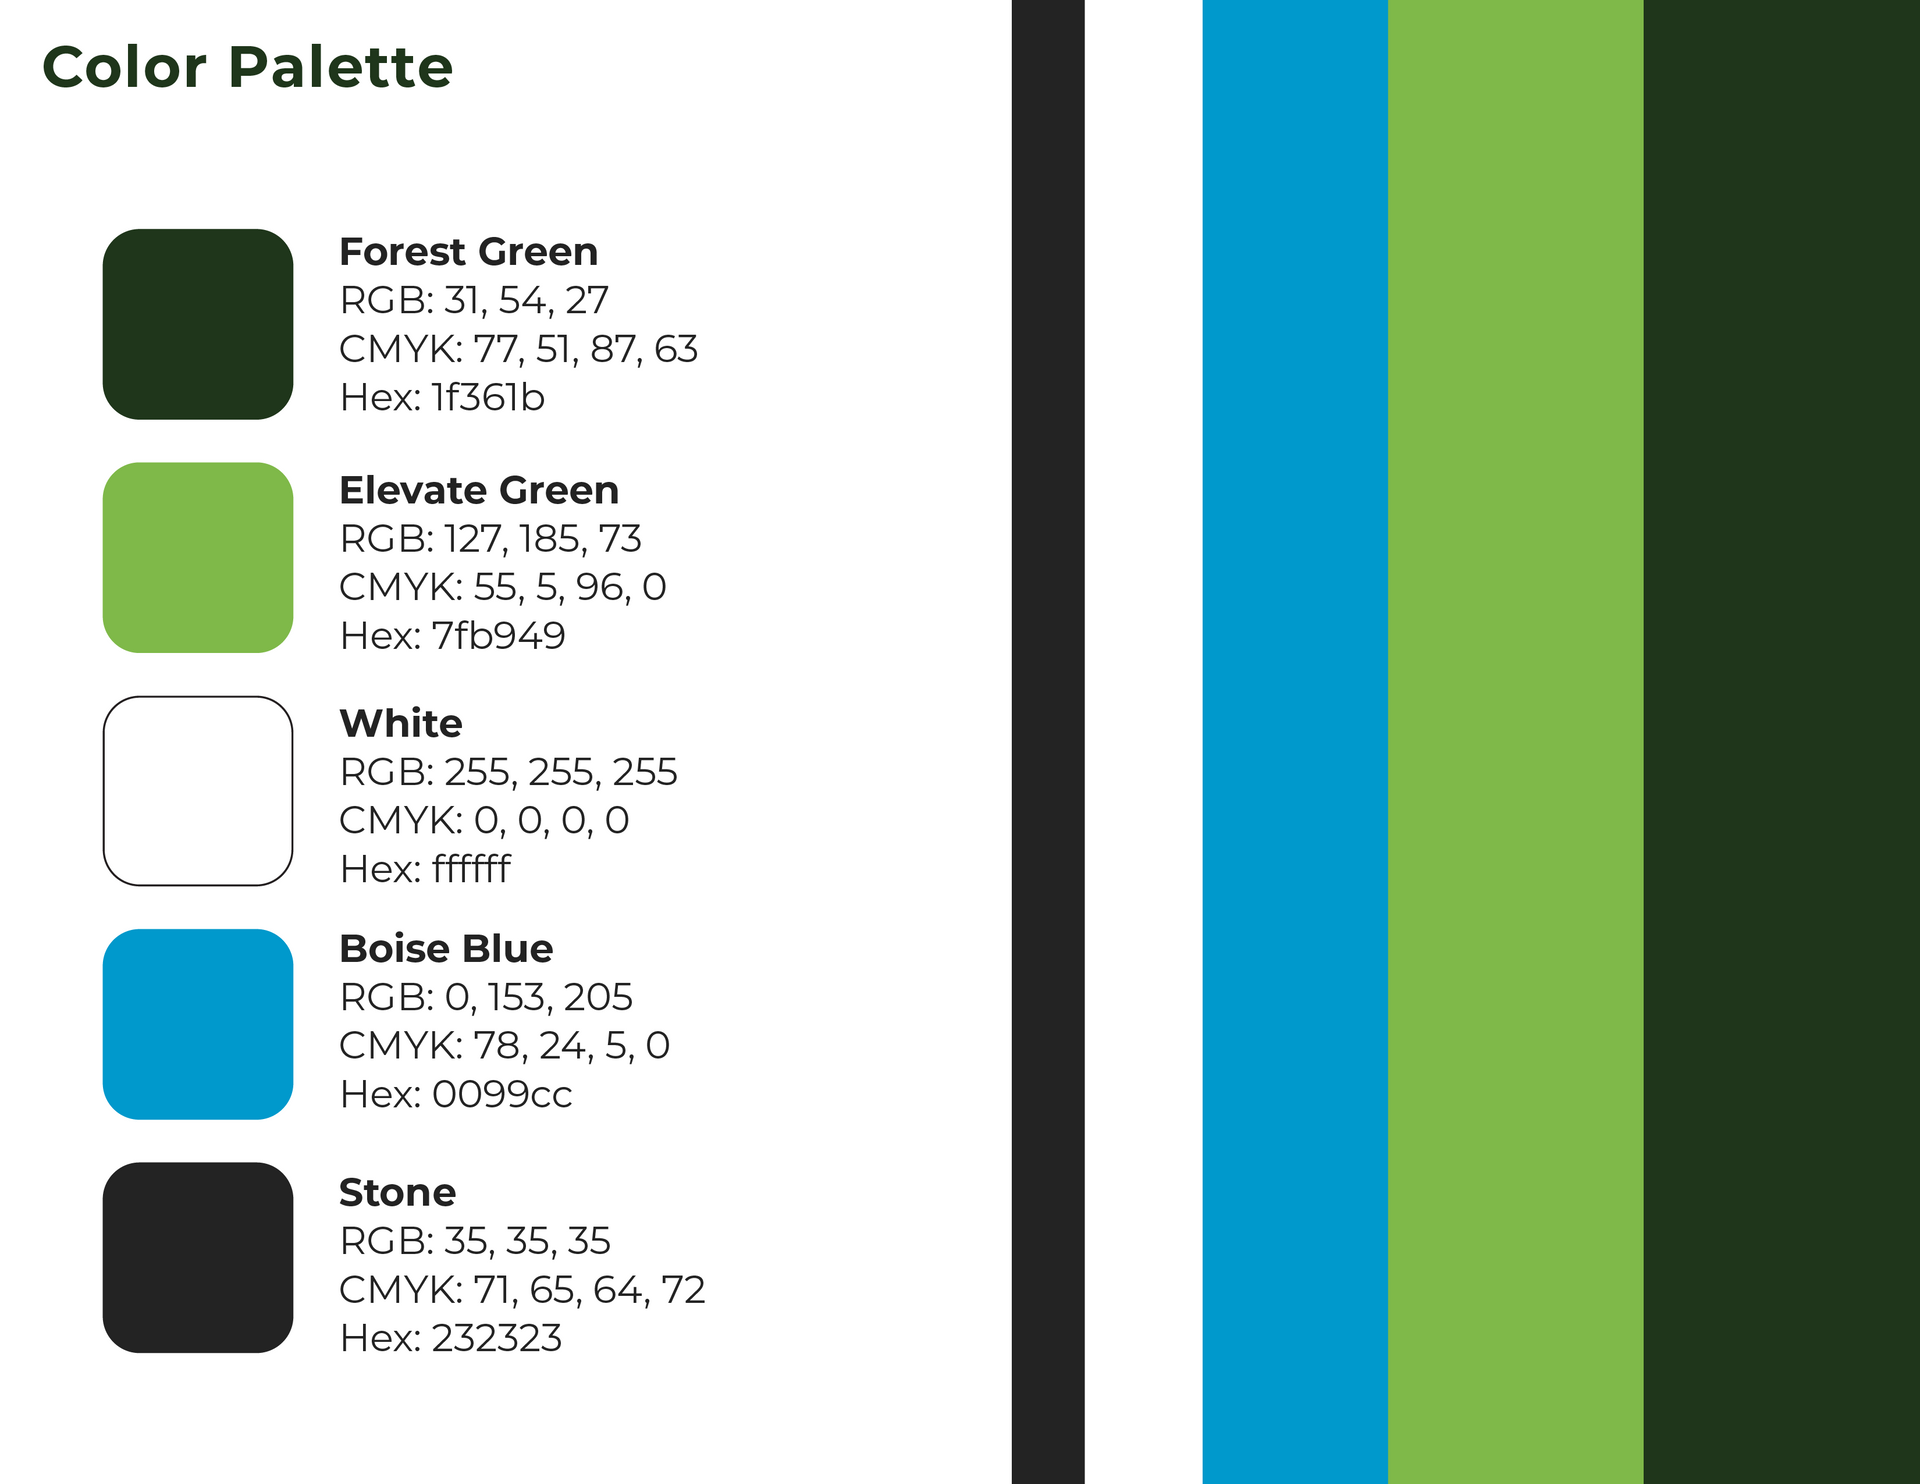 A color palette with four different shades of green and blue